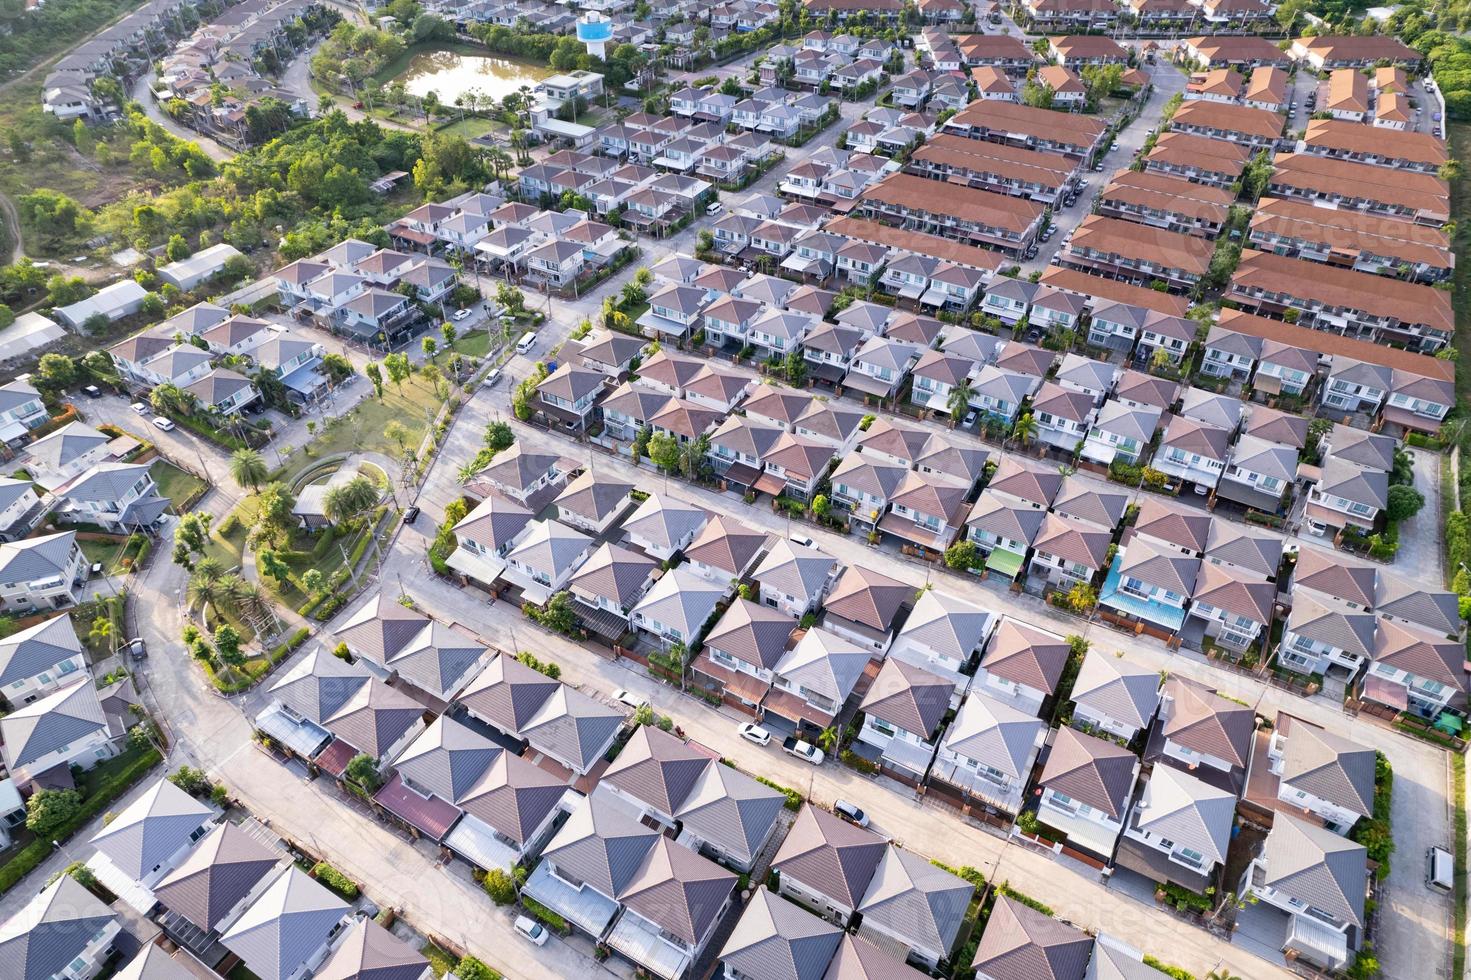 New development real estate. Aerial view of residential houses and driveways neighborhood during a fall sunset or sunrise time.Tightly packed homes.Top down view over private houses in phuket thailand photo